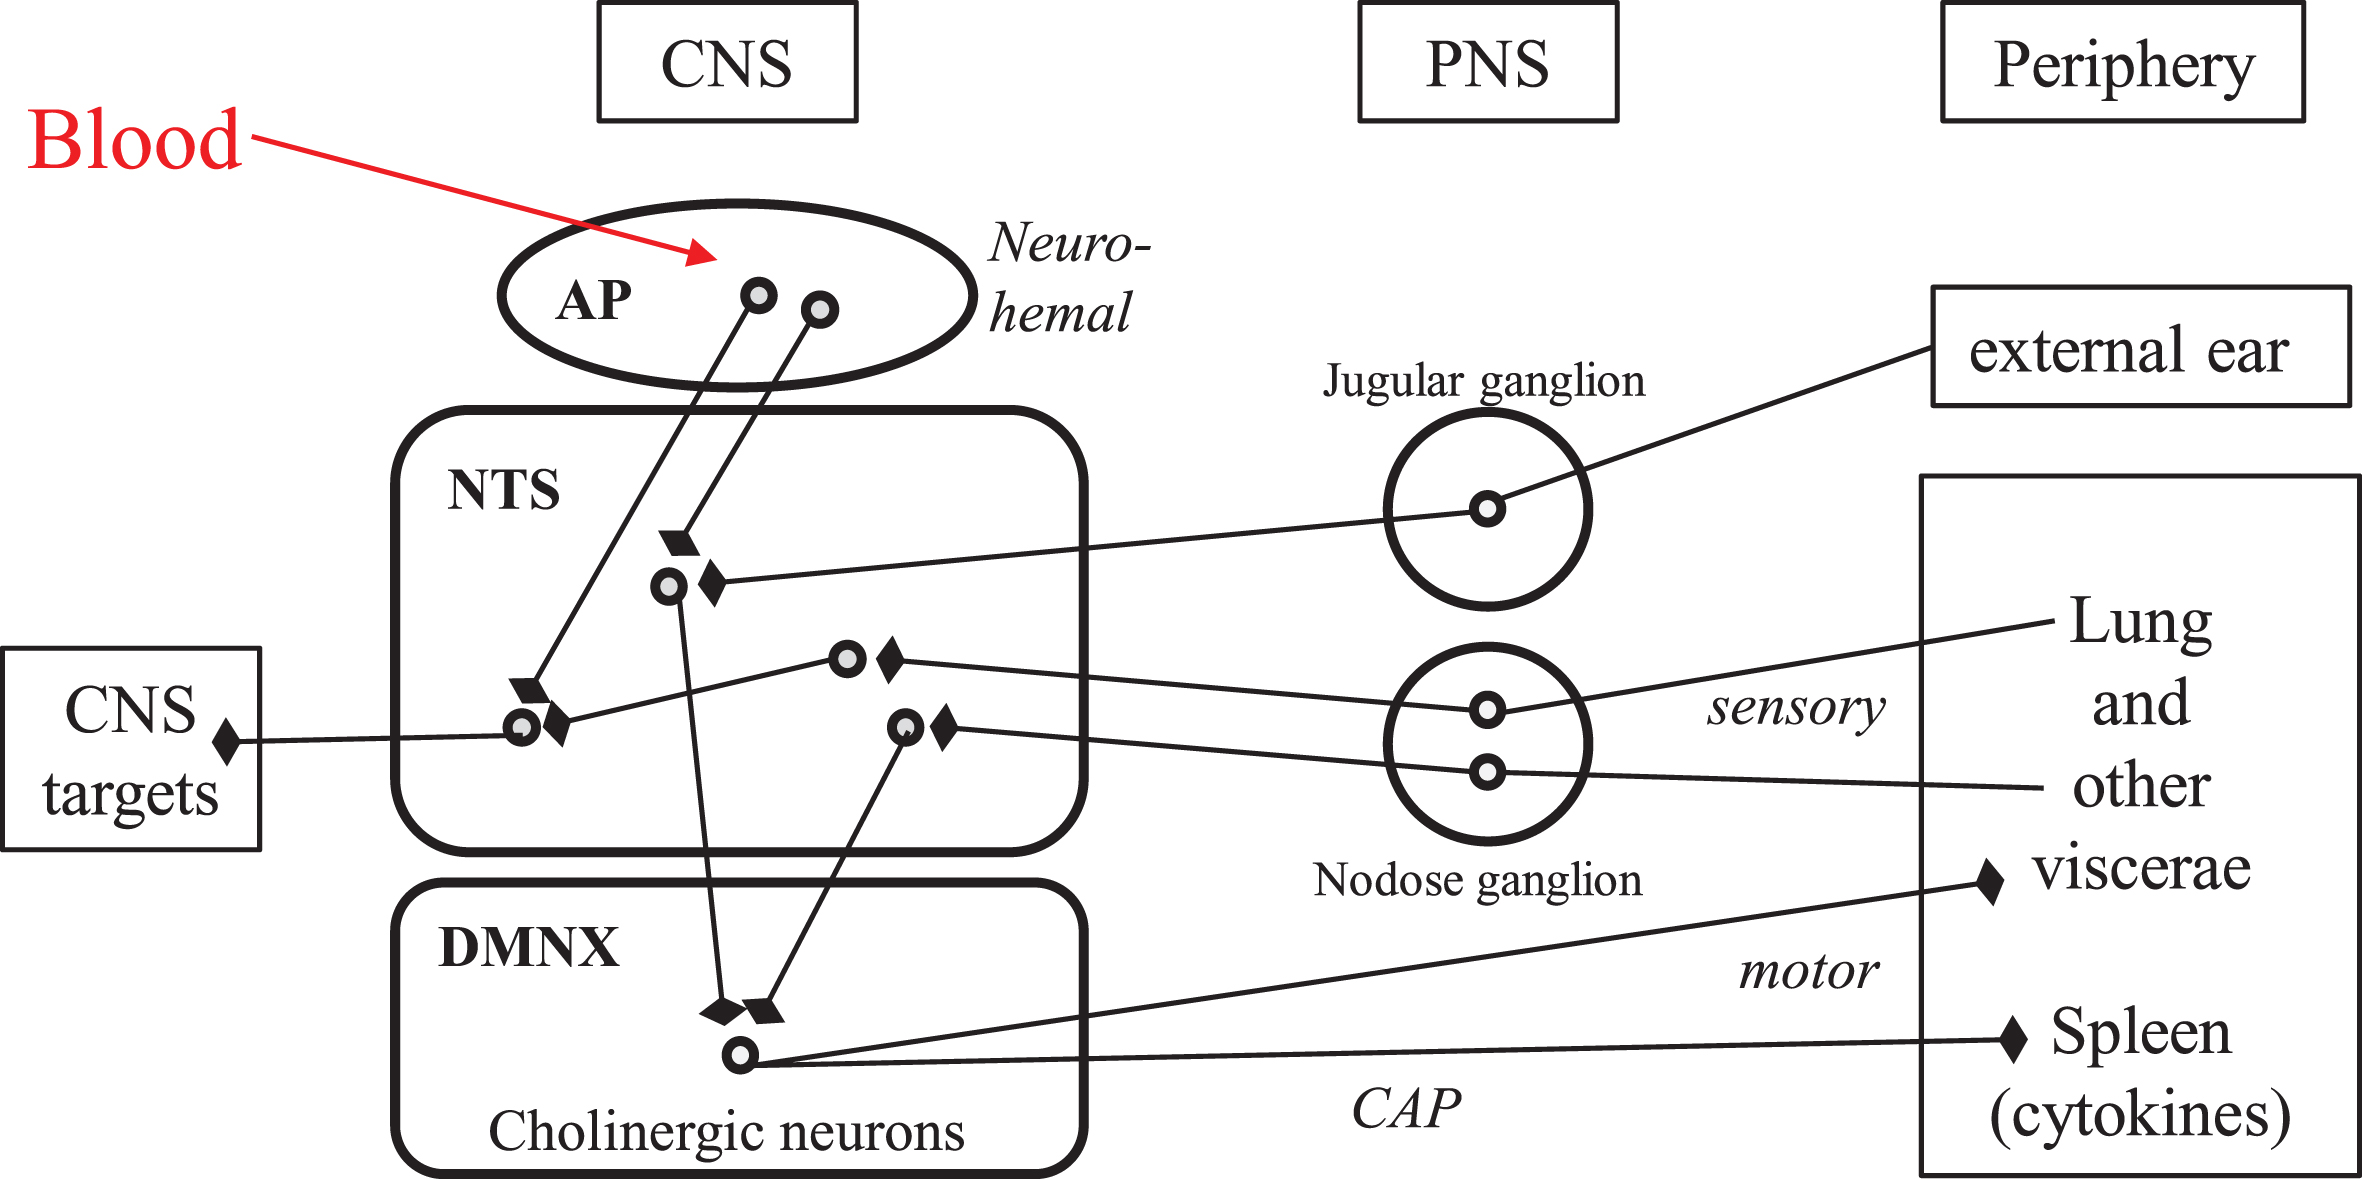 Neuroanatomical connectivity of the dorsal vagal complex in human brainstem: the “vital node” of pioneer physiologists. Round symbols represent neuronal perikarya. Arrows with blunt end symbolize axonal presynaptic endings. AP, area postrema; CAP, cholinergic anti-inflammatory pathway; CNS, central nervous system; DMNX, dorsal motor nucleus of the vagus; NTS, nucleus tractus solitarius; PNS, peripheral nervous system; IVth, fourth intracerebral ventricle.